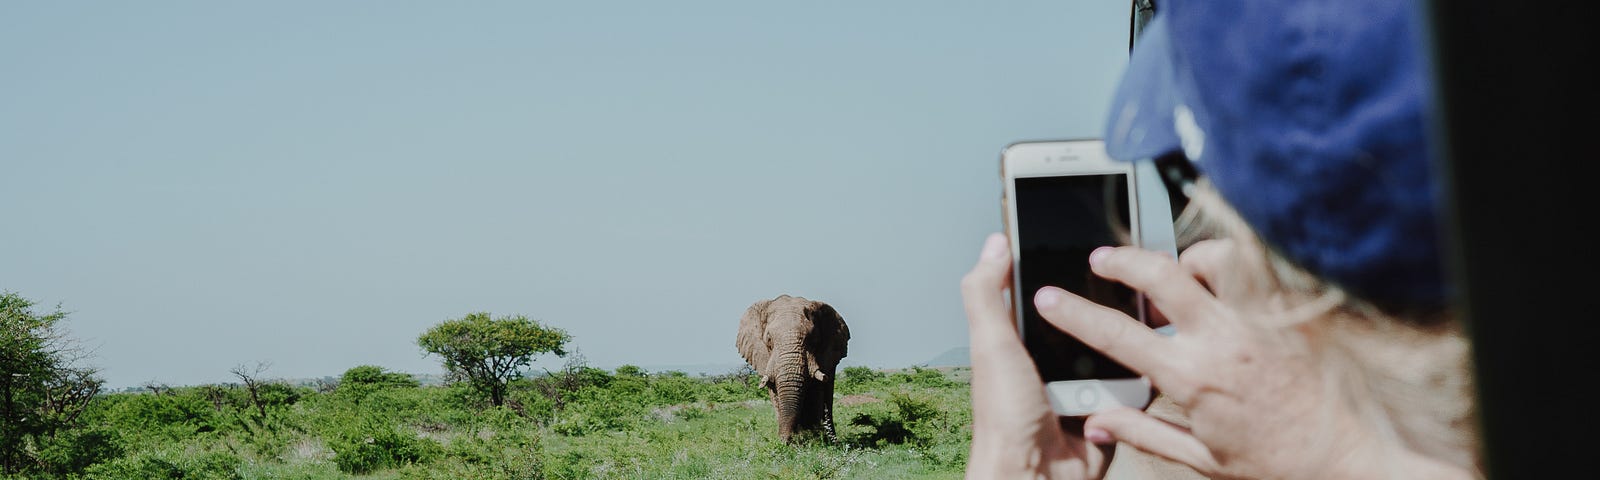 A woman takes a picture of an elephant in the distance from a car